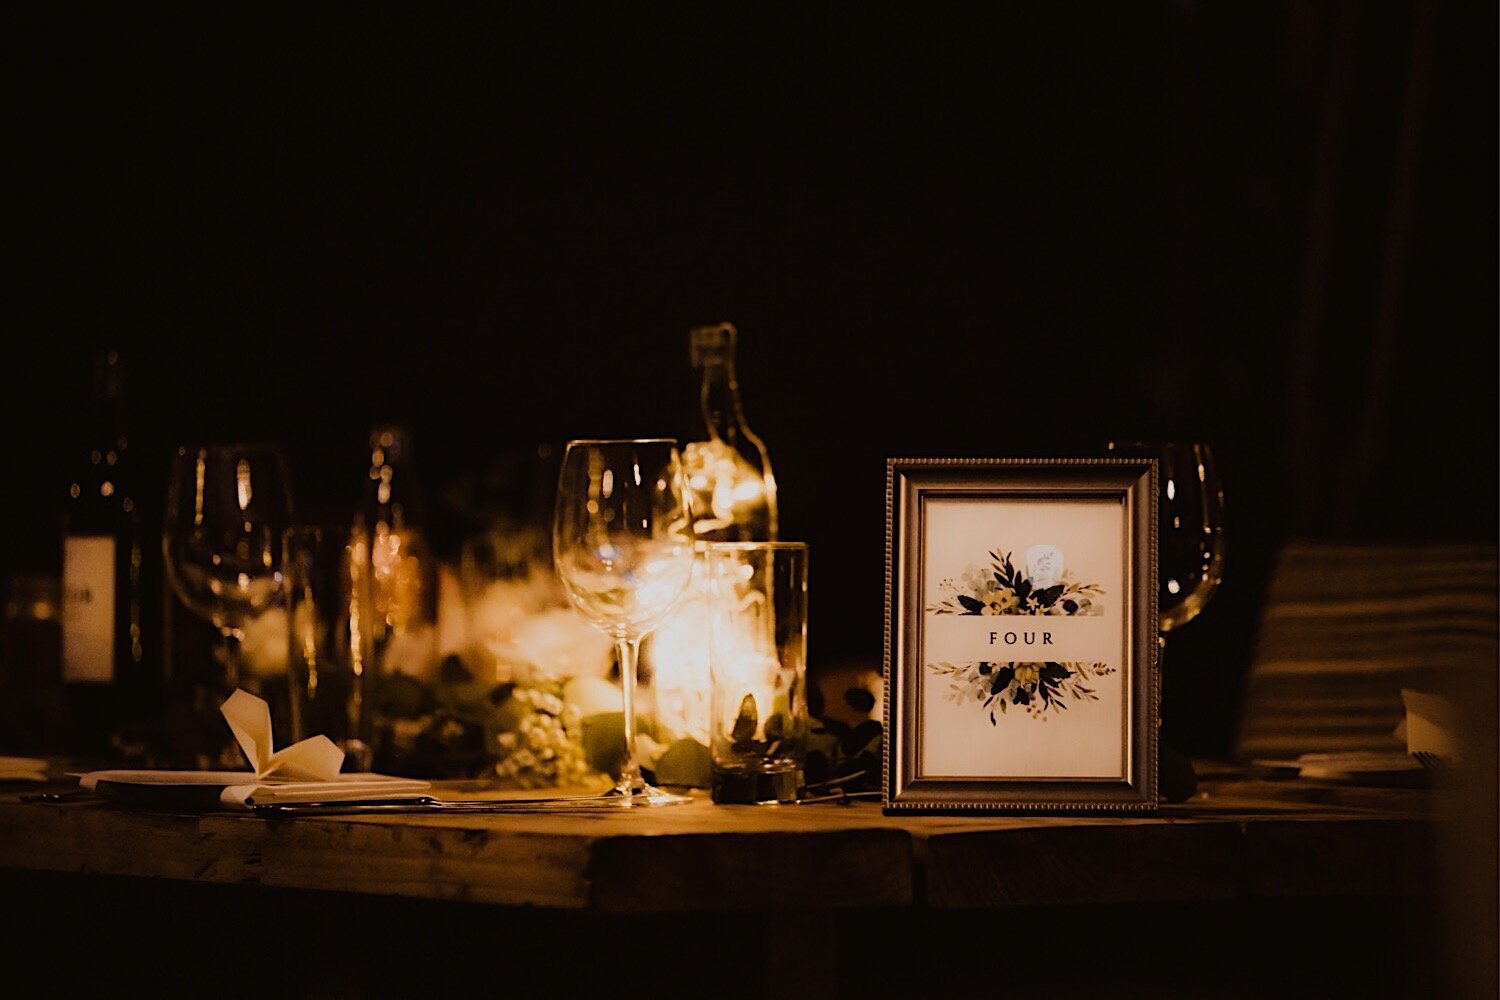 084_TWS-879_bride__photography_henley_oxfordshire_styling_millitary_setting_table_crooked_wedding_groom_winter_billet.jpg